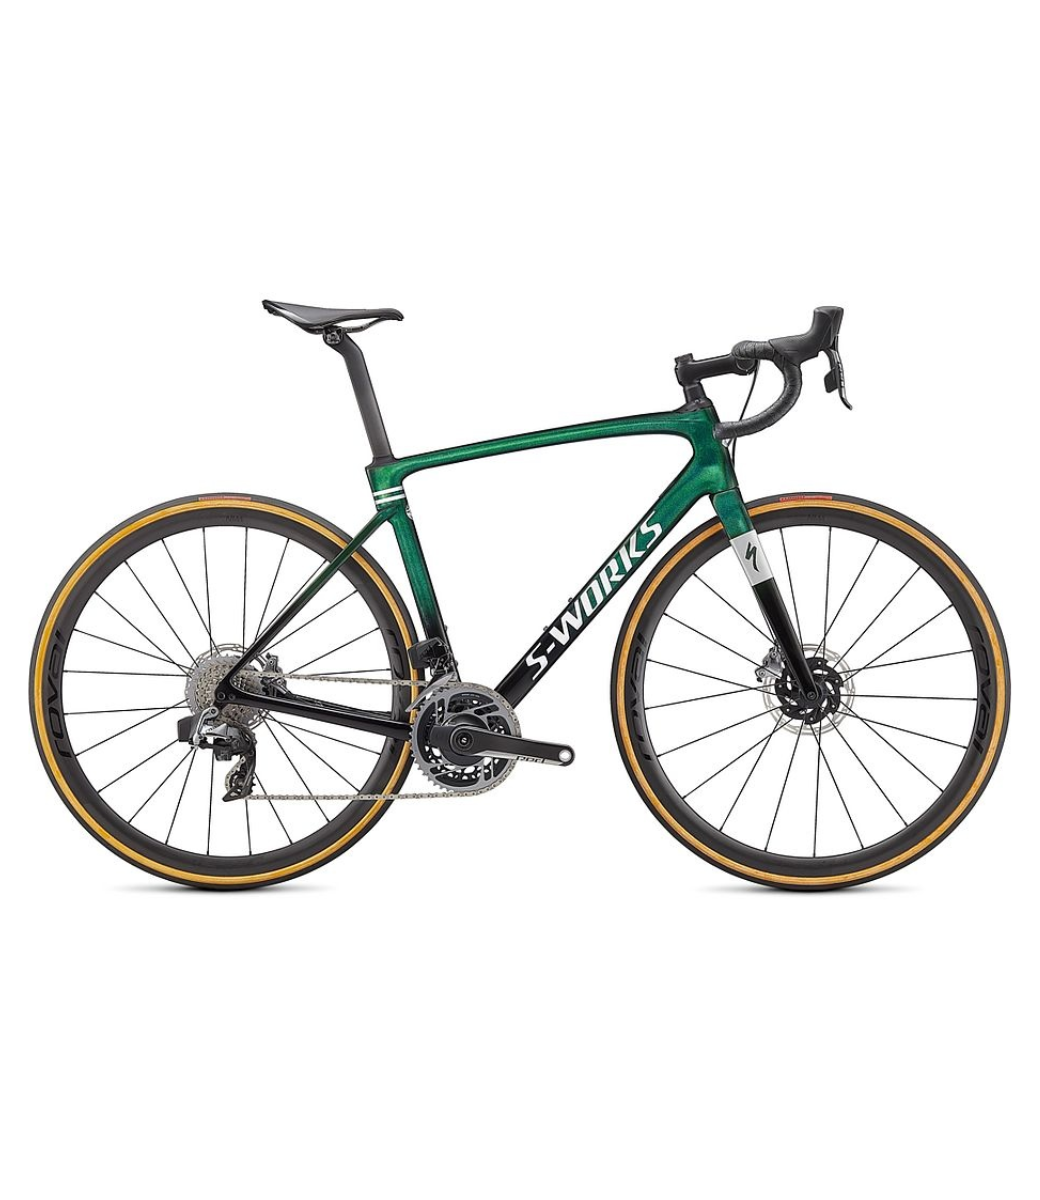 Specialized S-Works Roubaix – SRAM Red eTAP AXS Gloss Green  Tint/Spectraflair/Satin Flake Silver 54